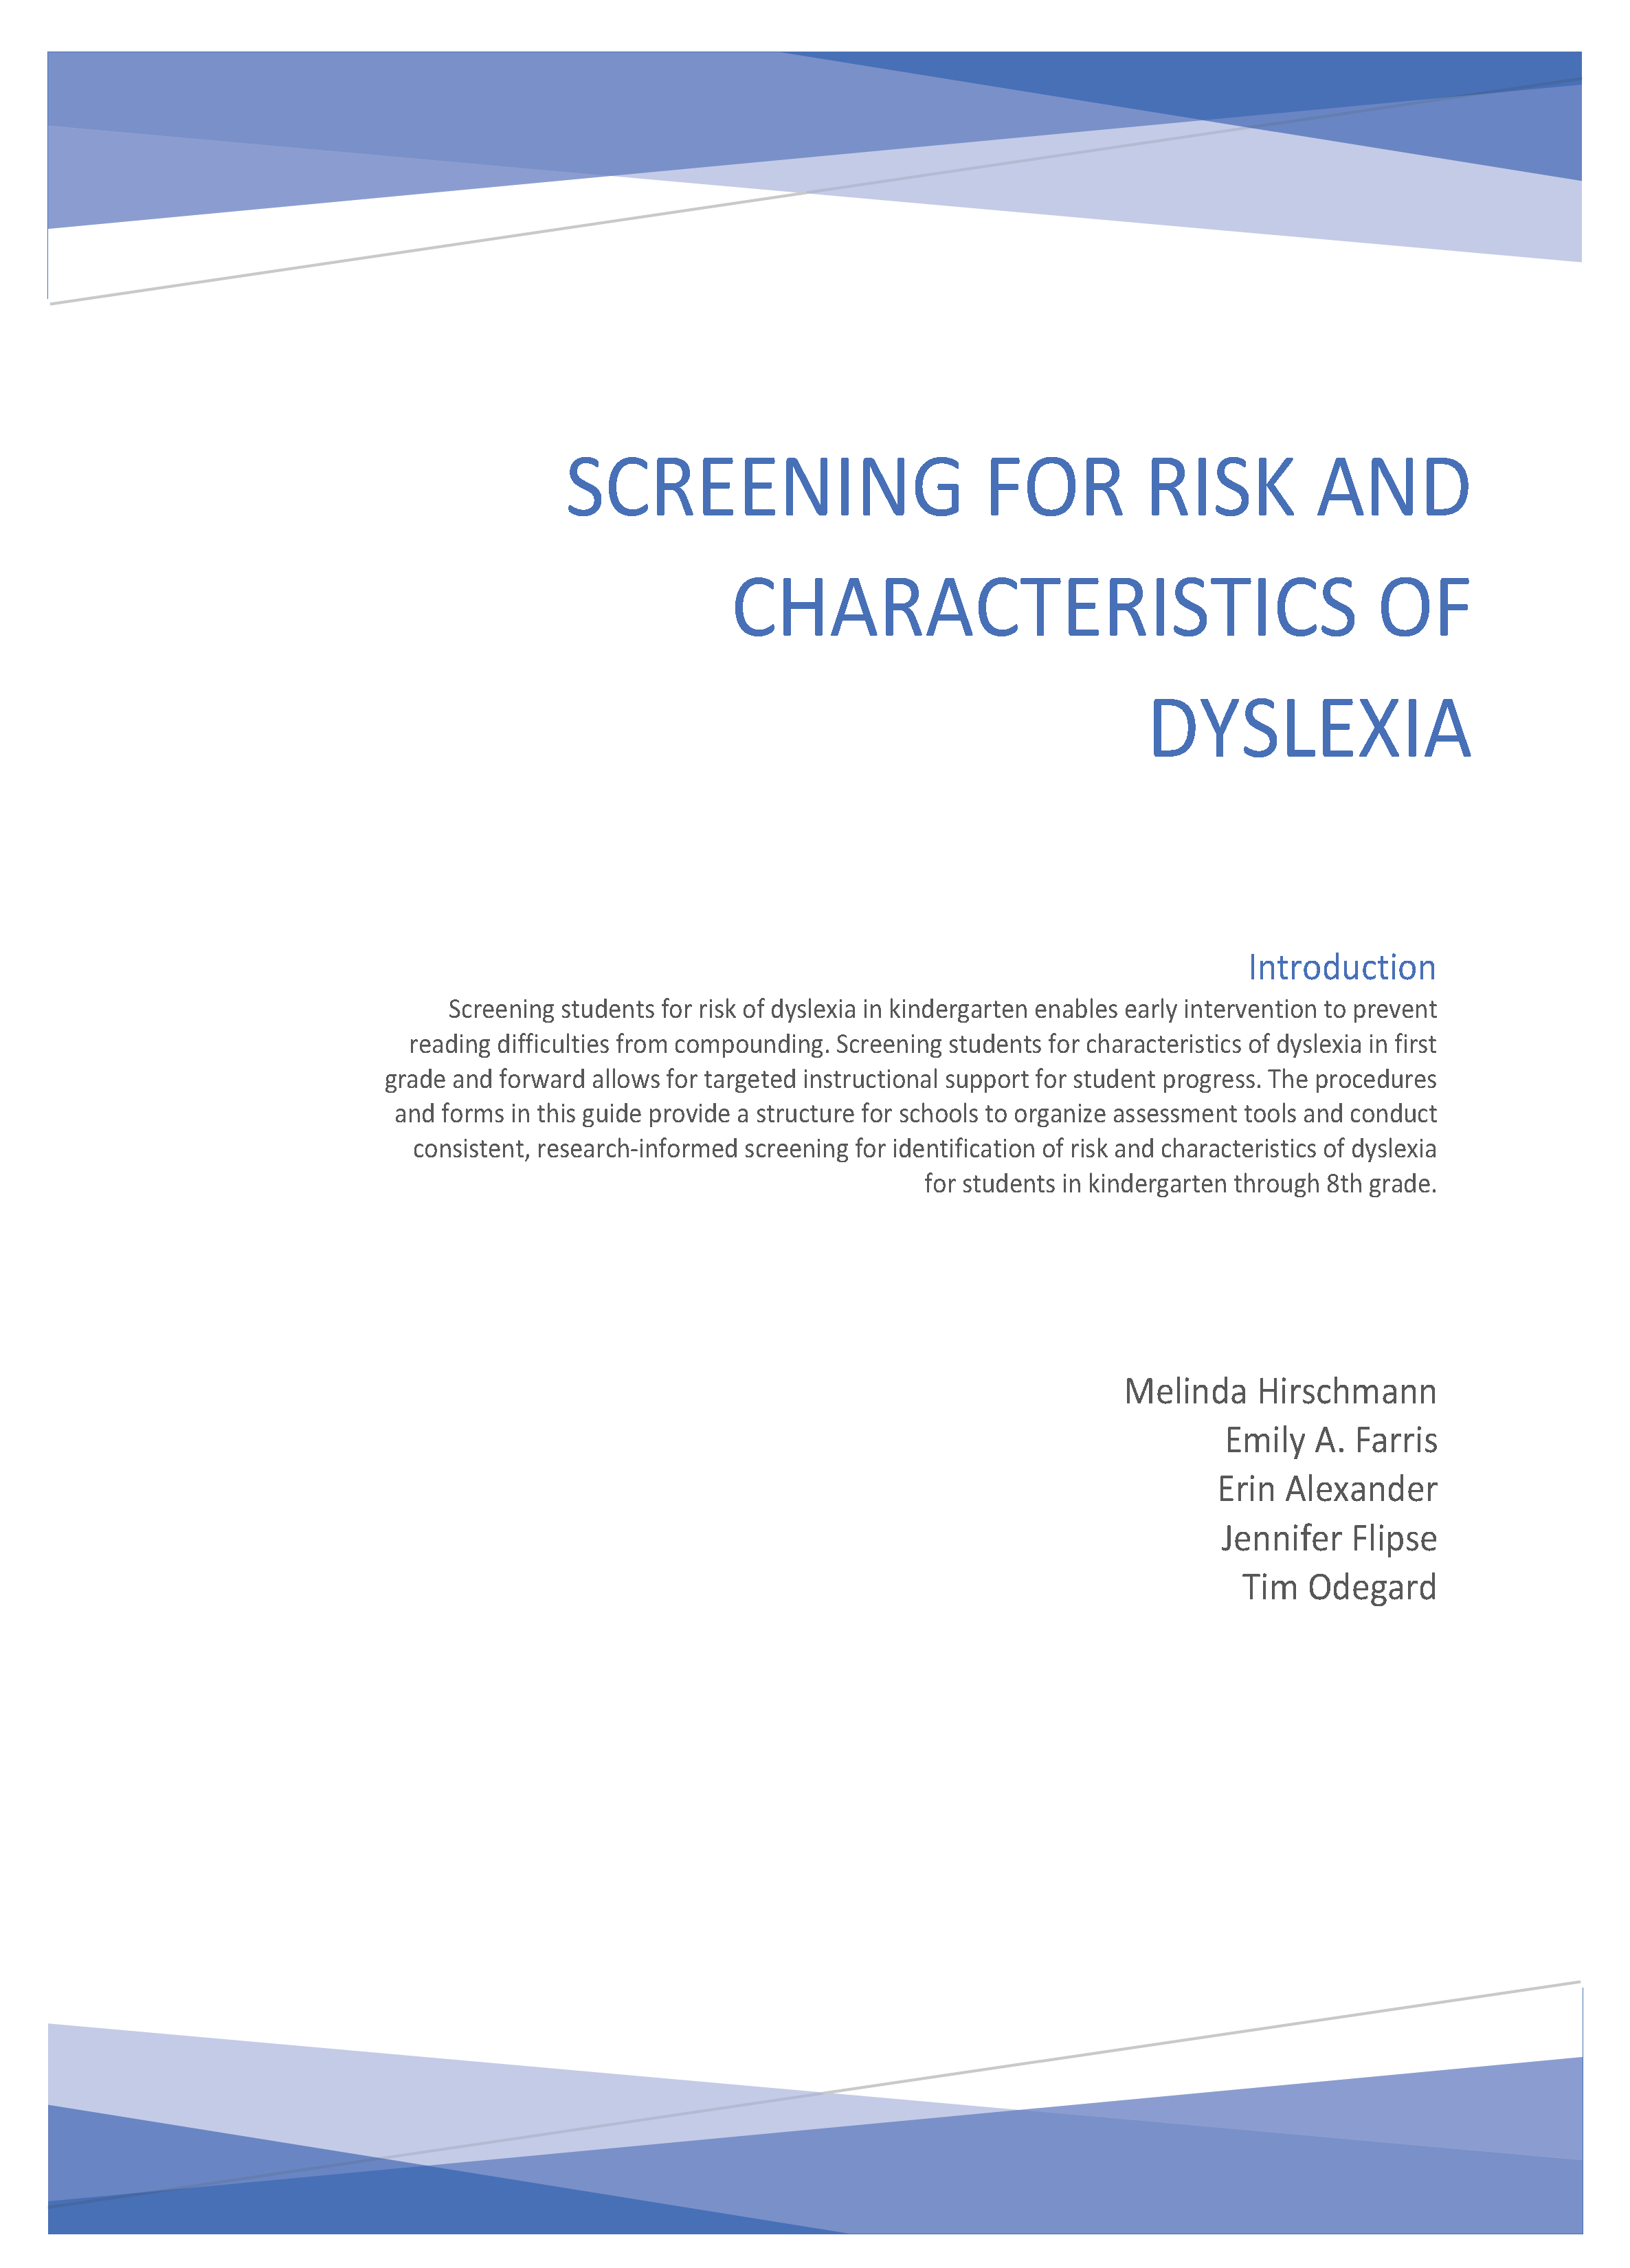 Screening for risks and characteristics of dyslexia